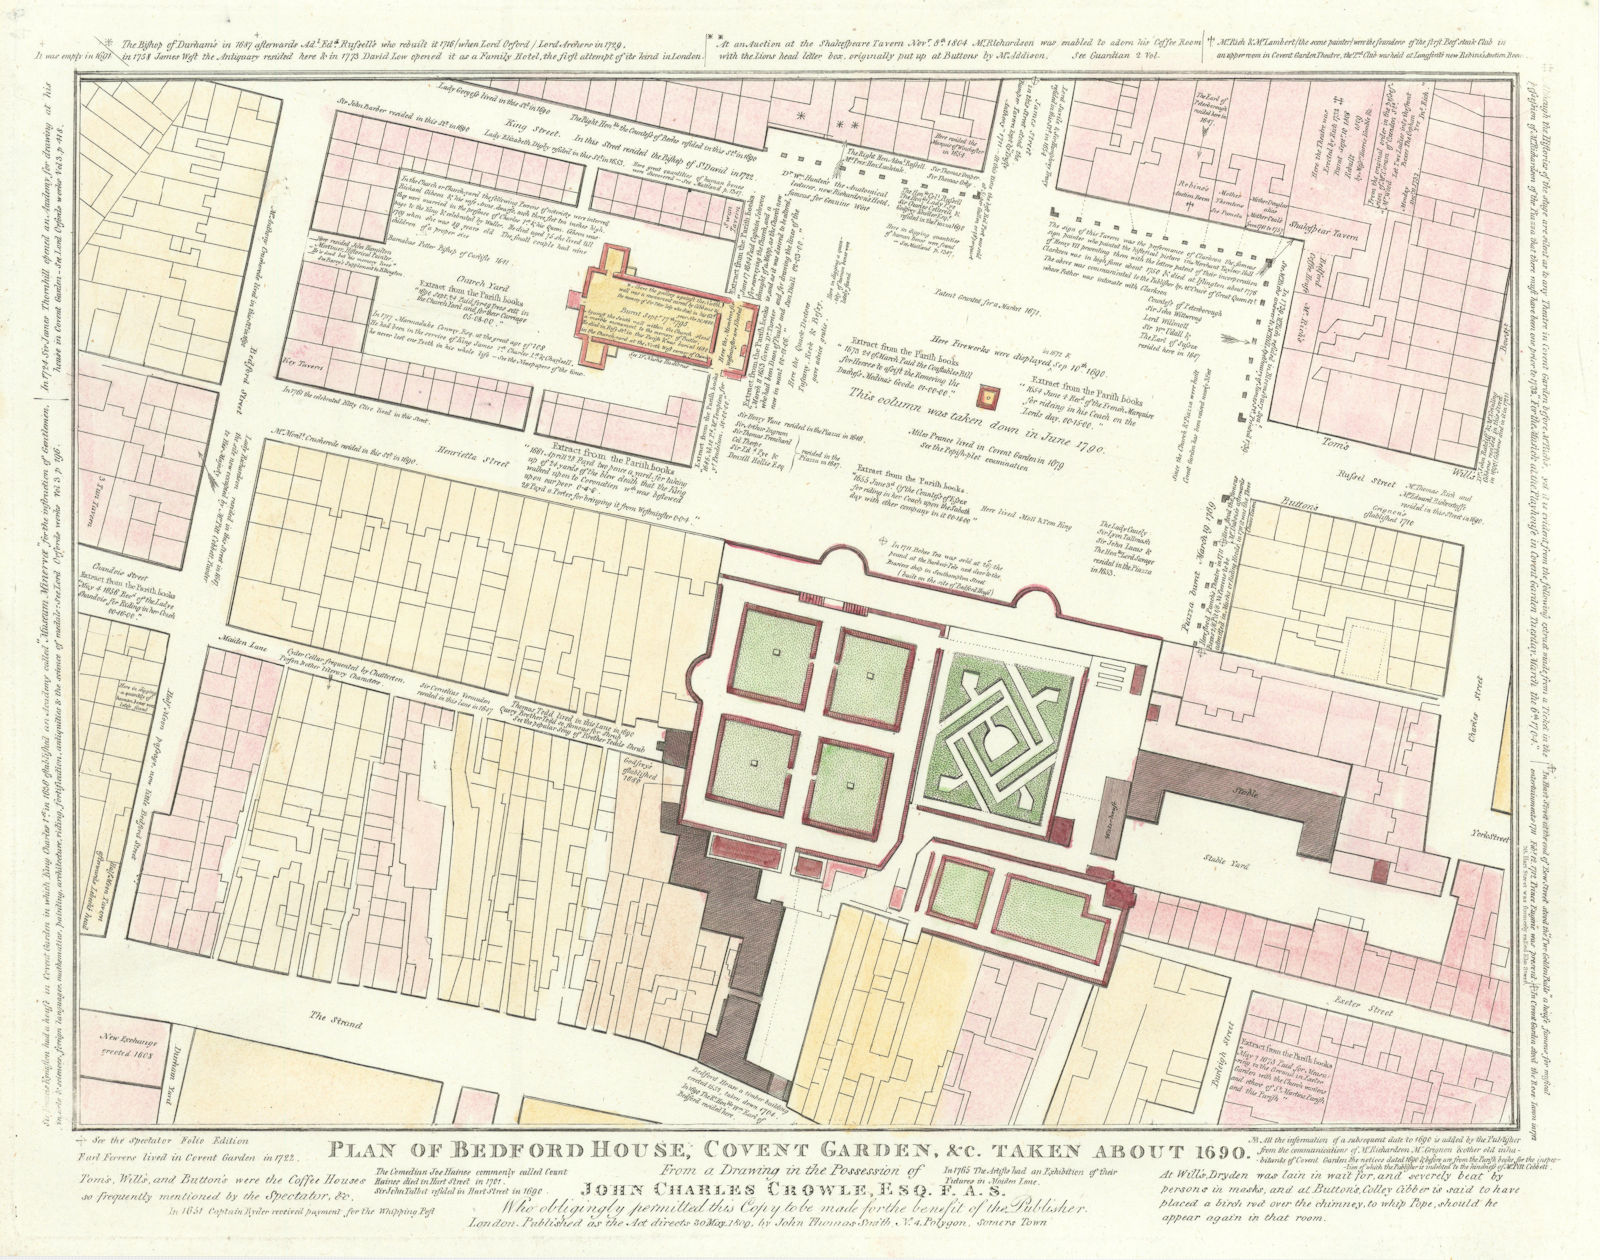 Associate Product Plan of Covent Garden Piazza & Bedford House in 1690. J.T. SMITH 1809 old map